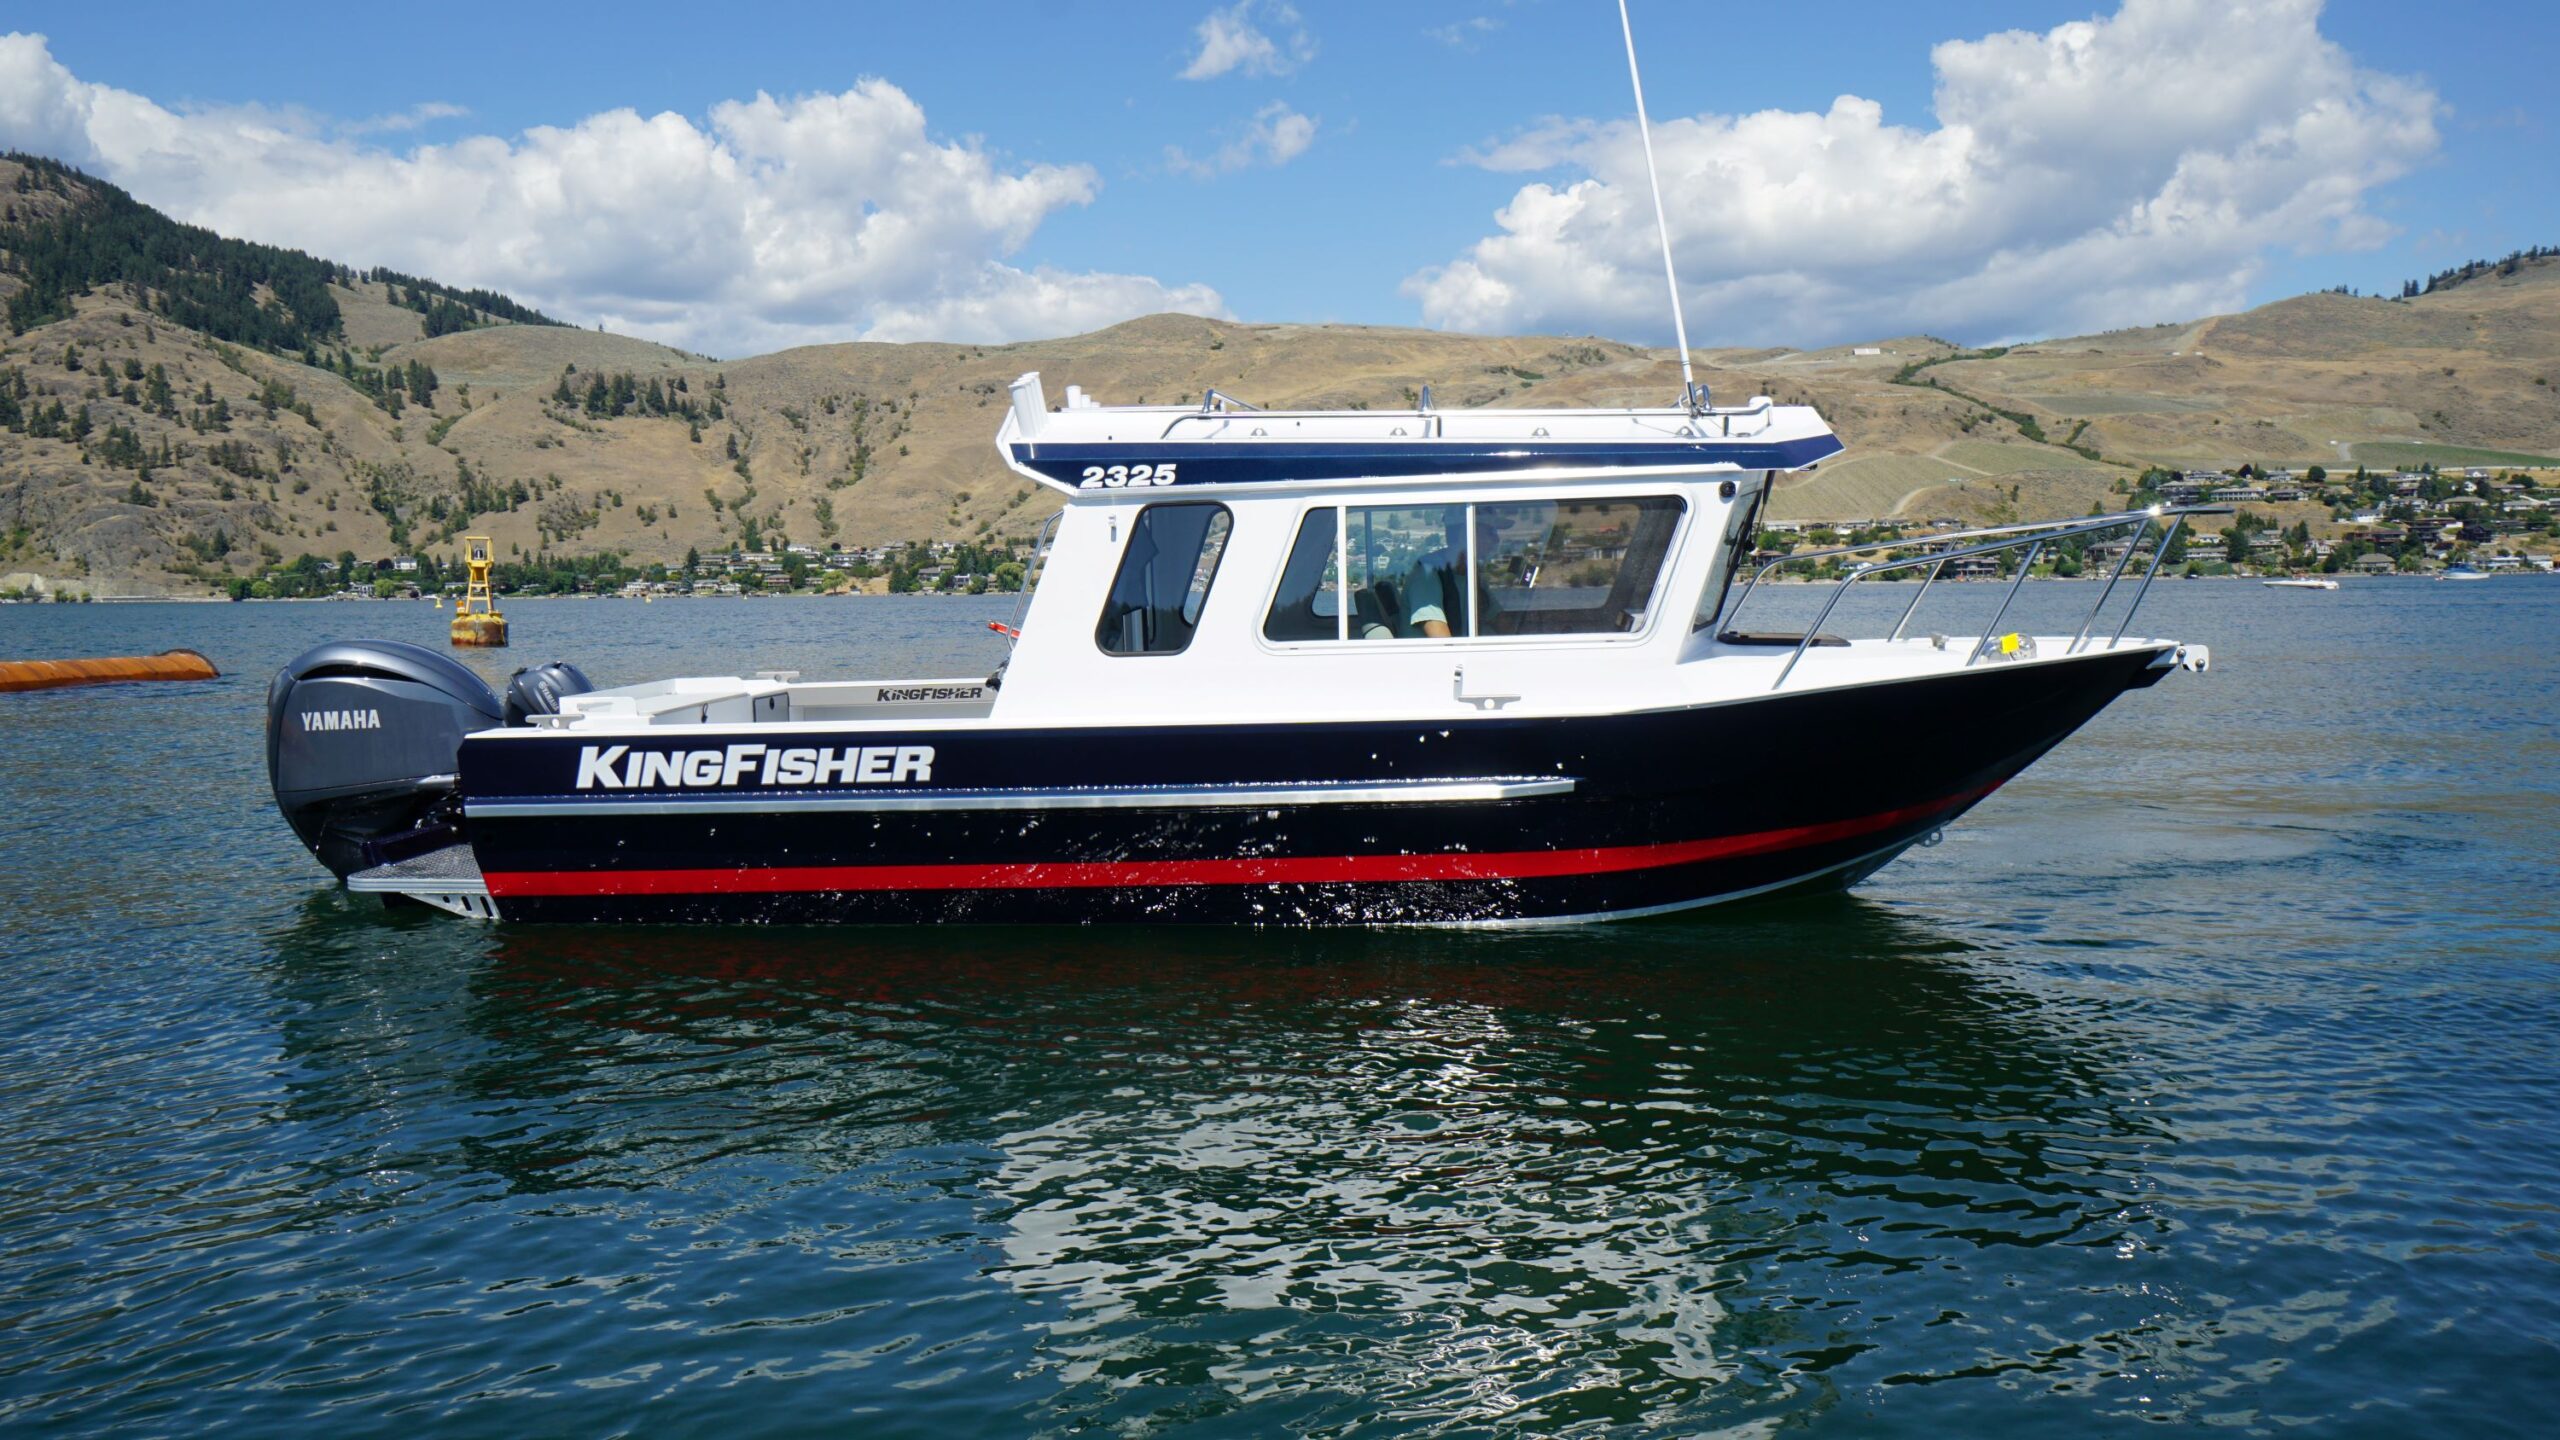 Purpose built for great fishing and exploring